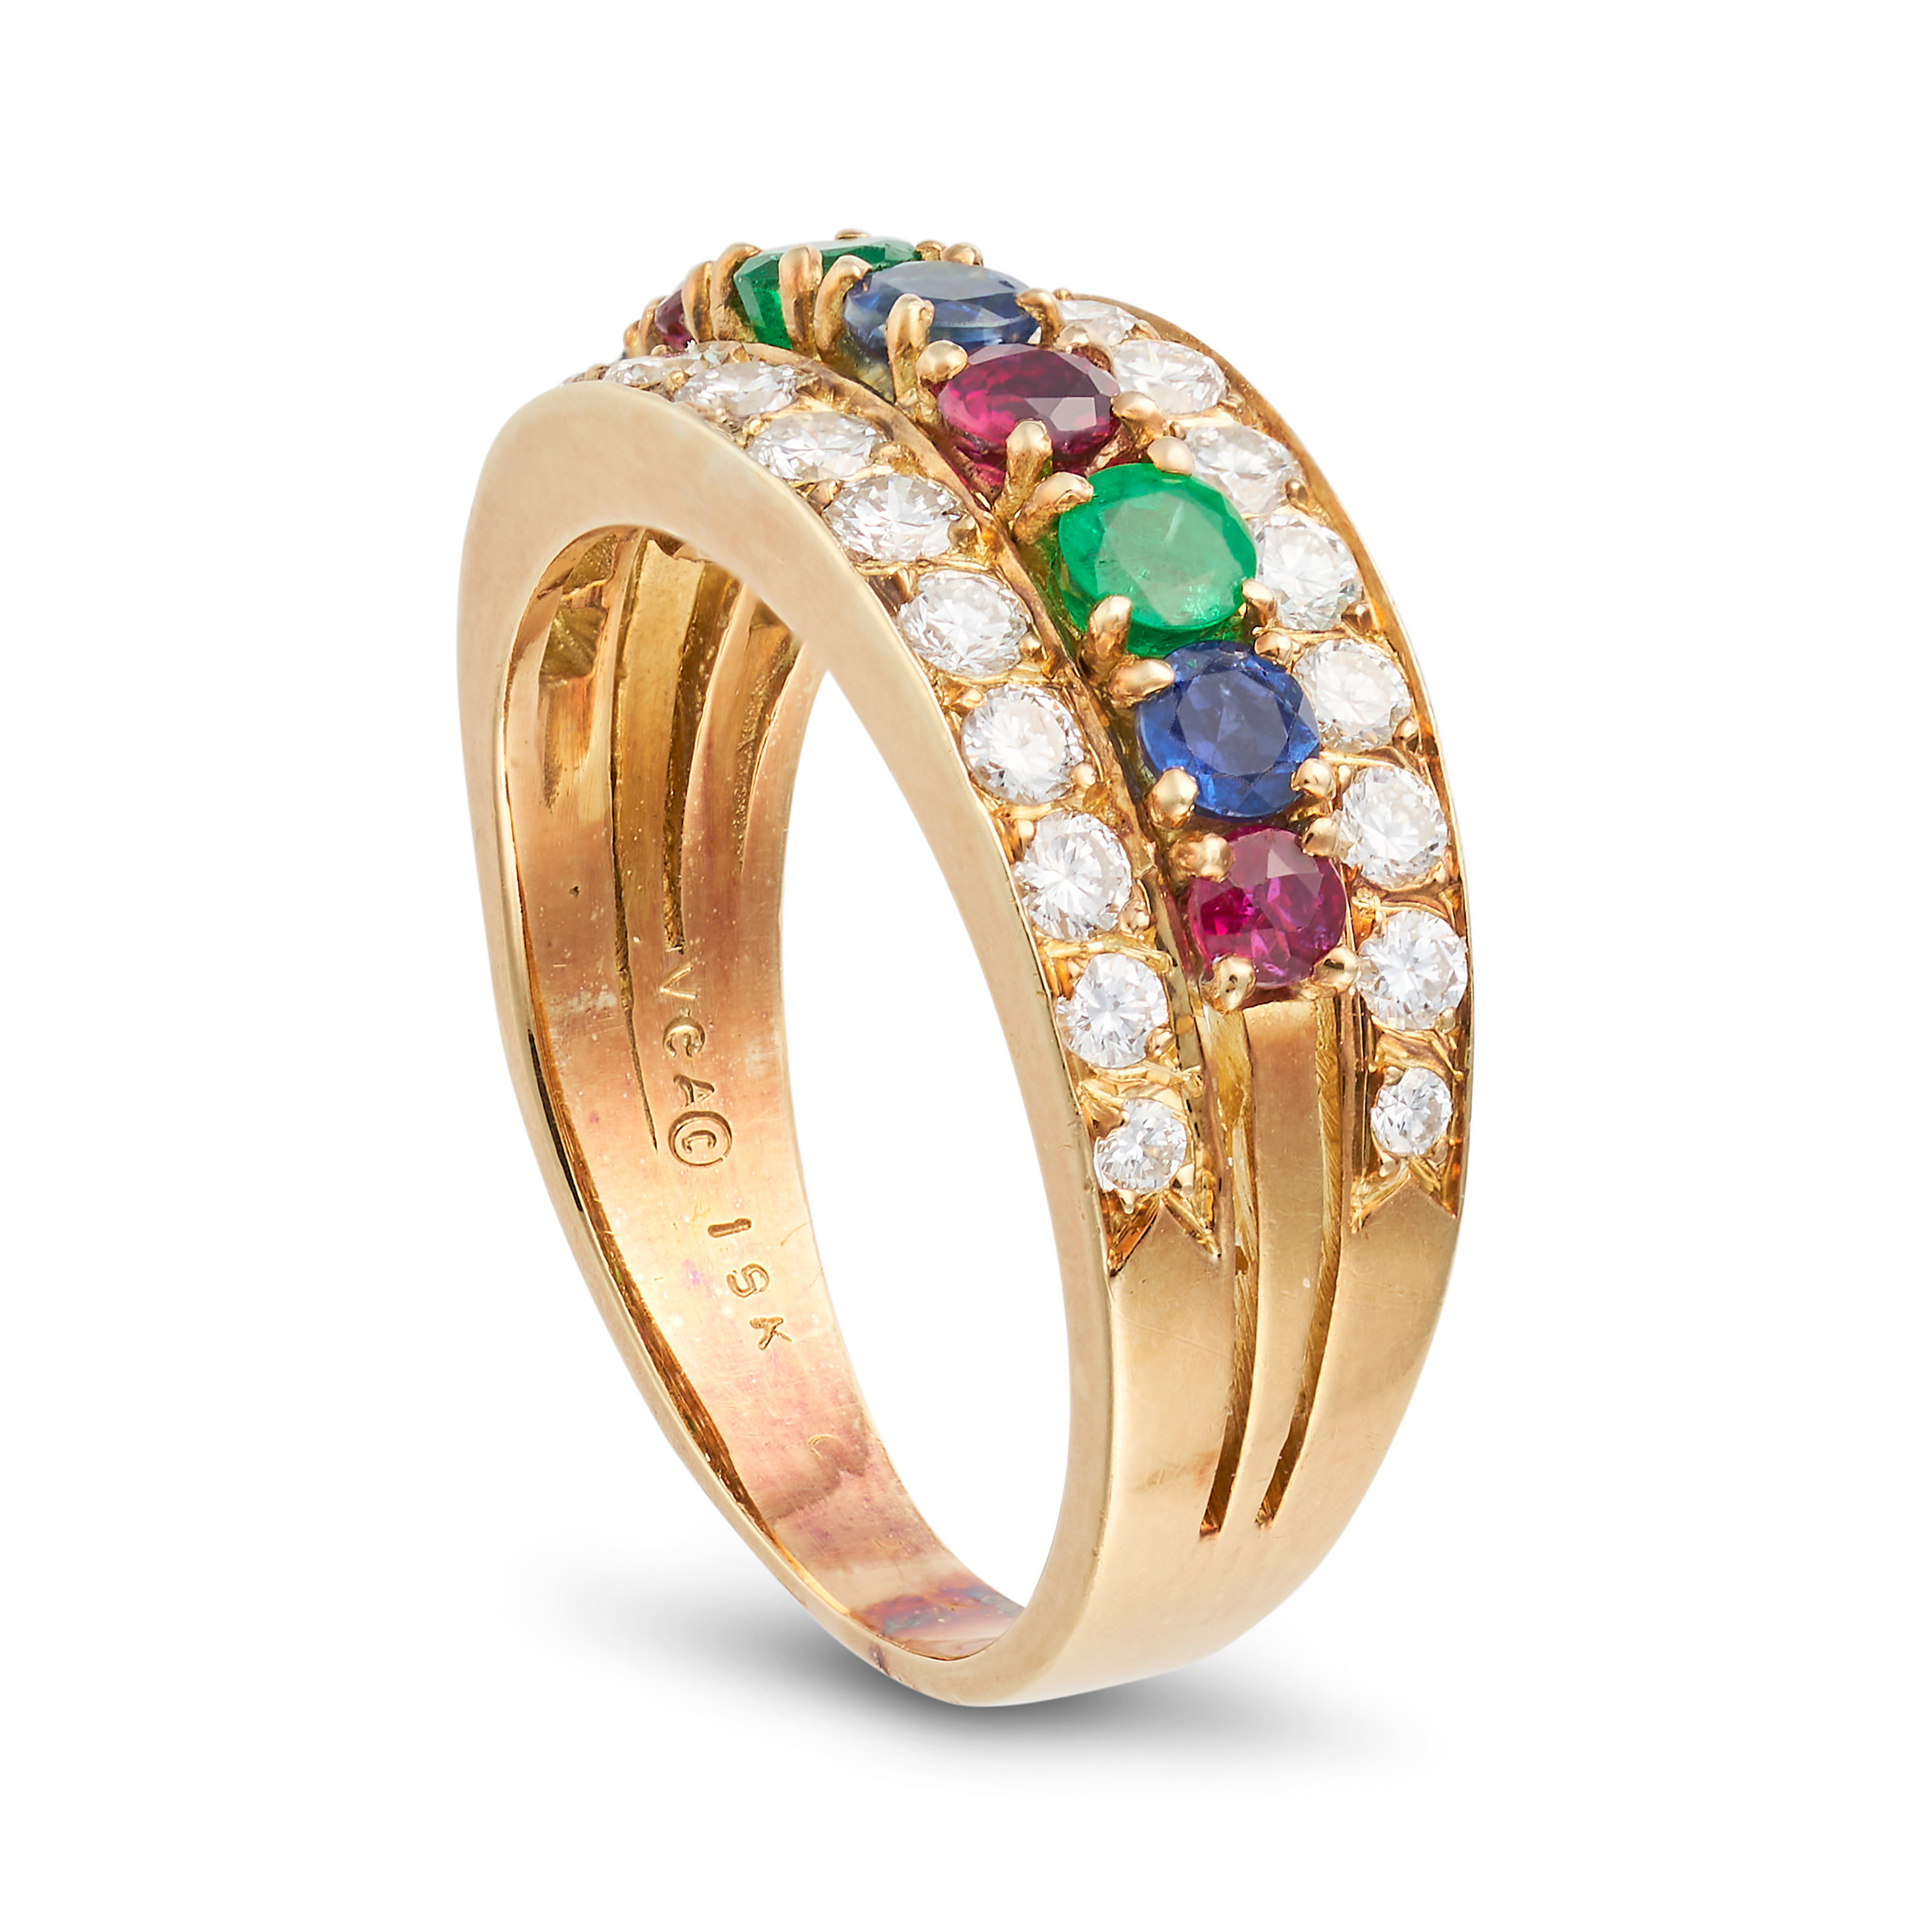 VAN CLEEF & ARPELS, A DIAMOND AND MULTIGEM RING in 18ct yellow gold, comprising a row of alternat... - Image 2 of 2